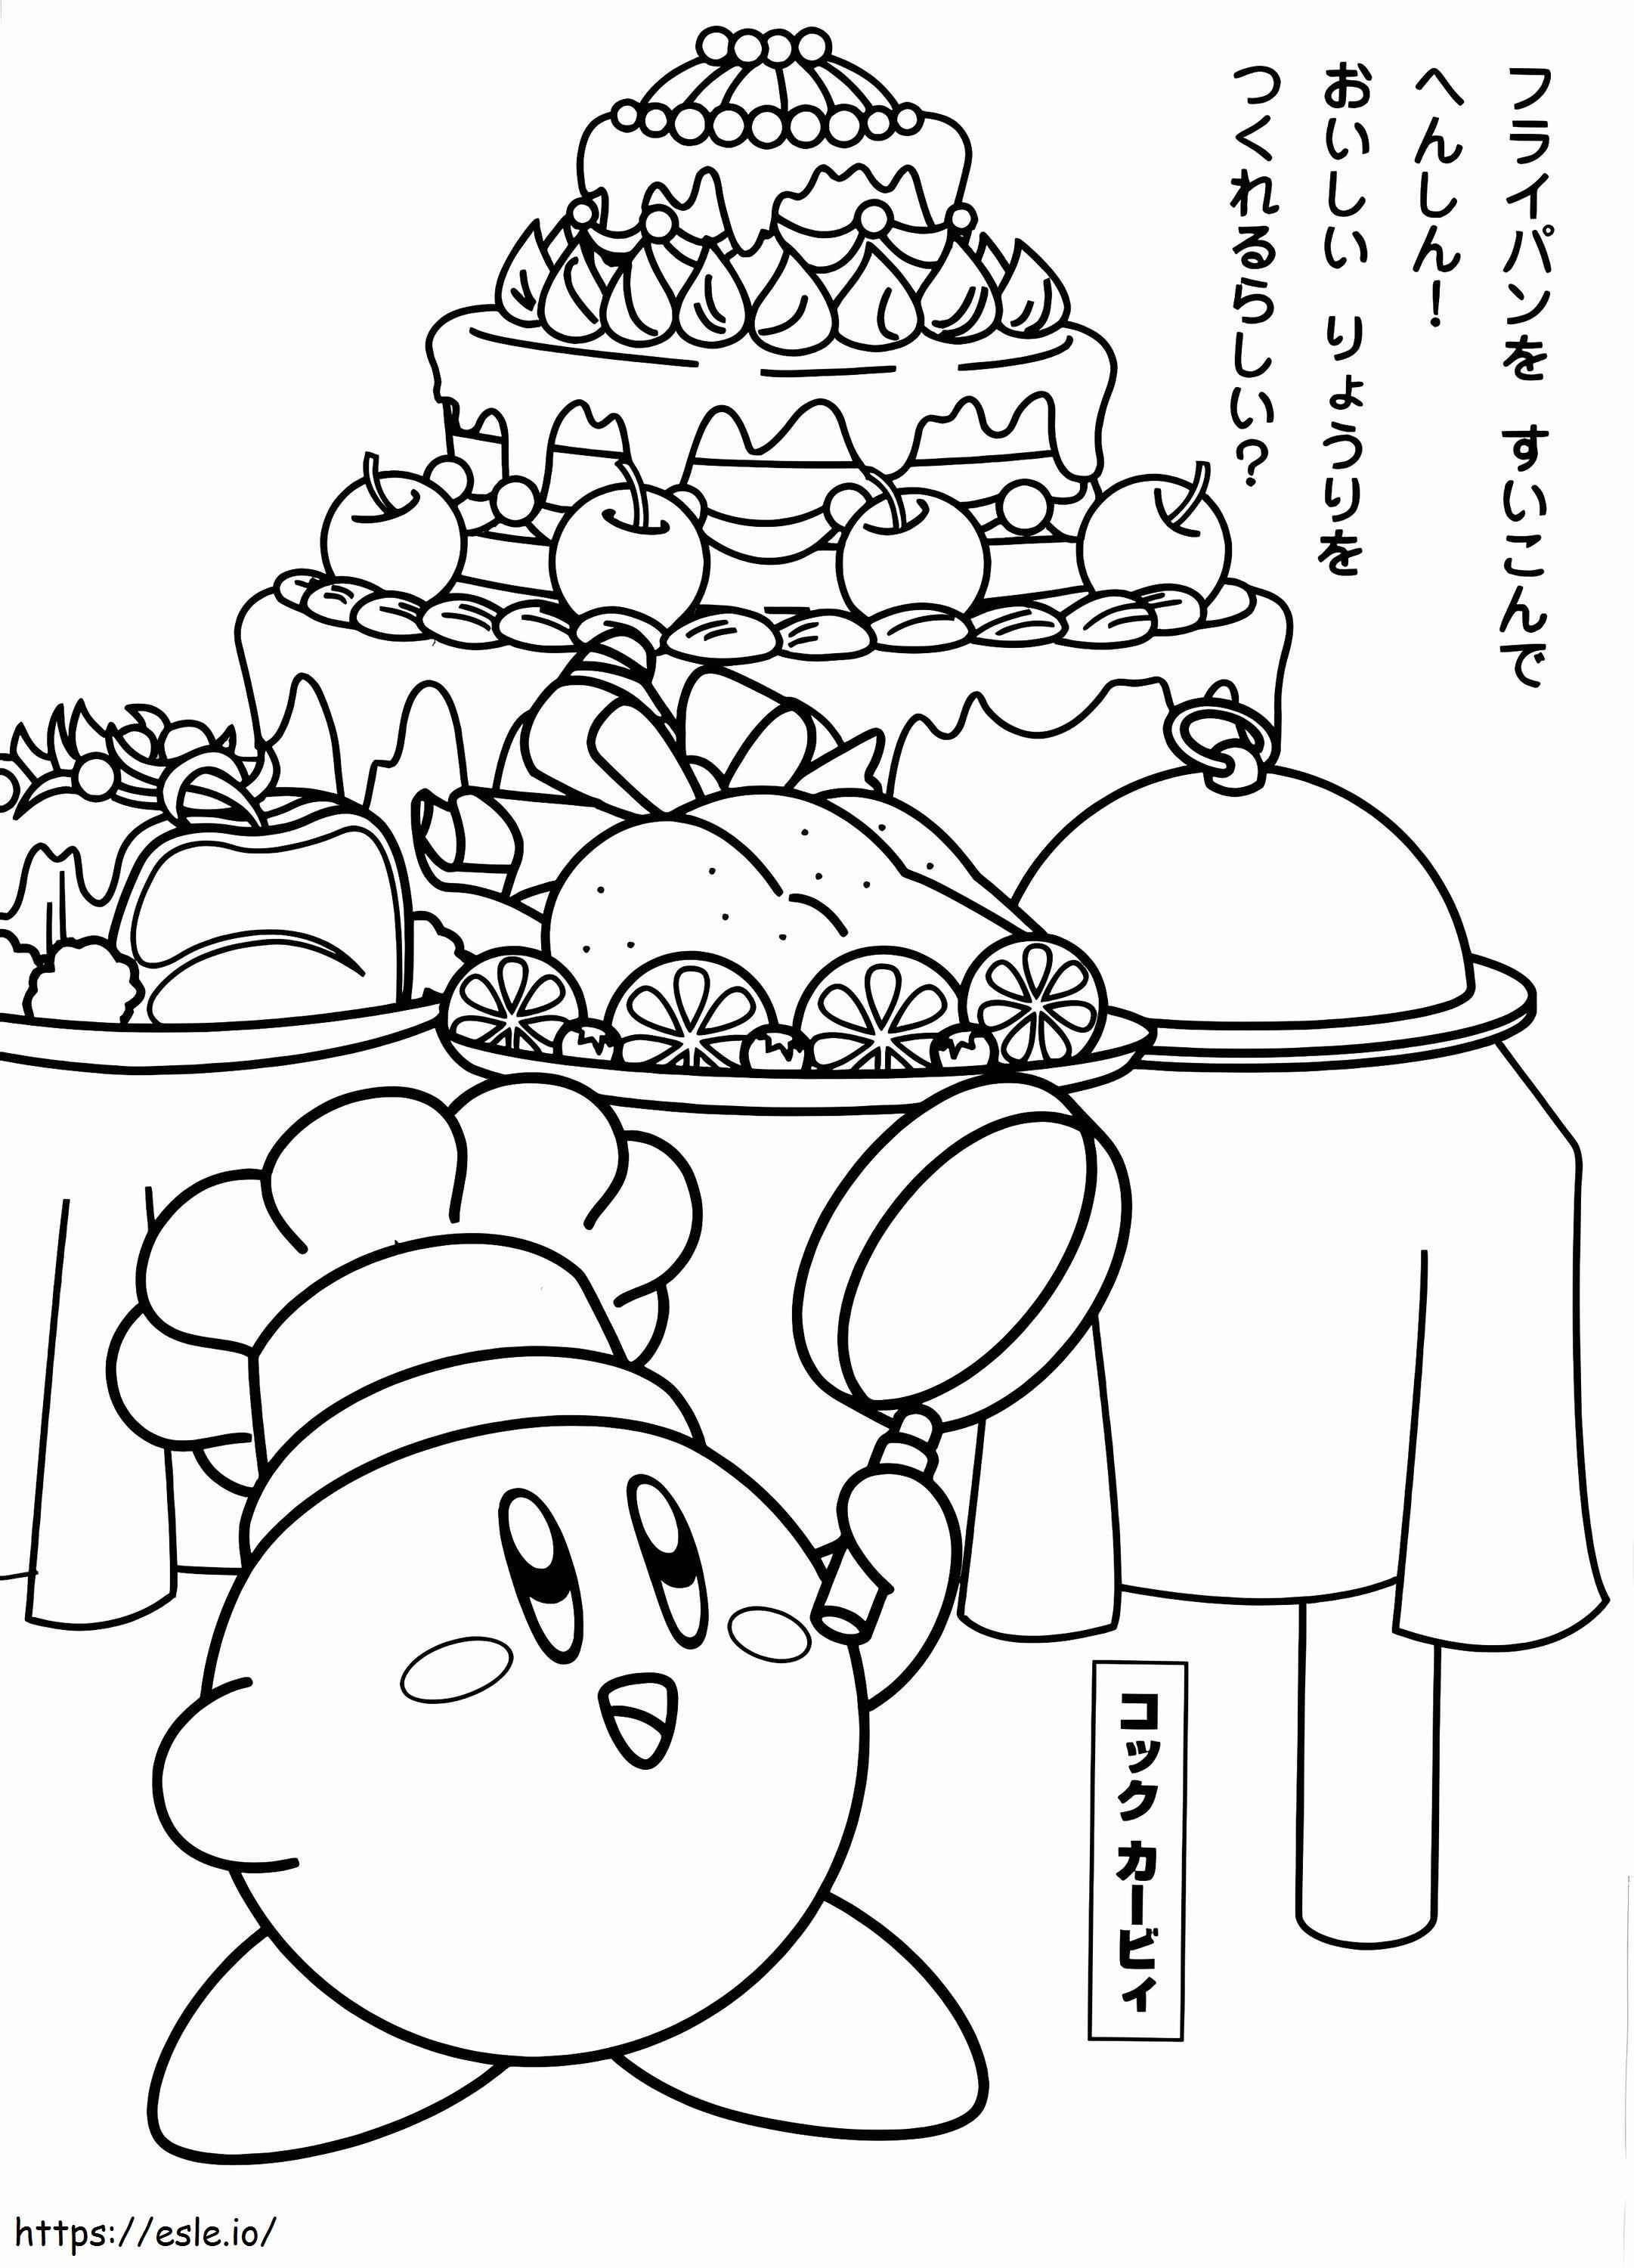 Kirby Chef coloring page